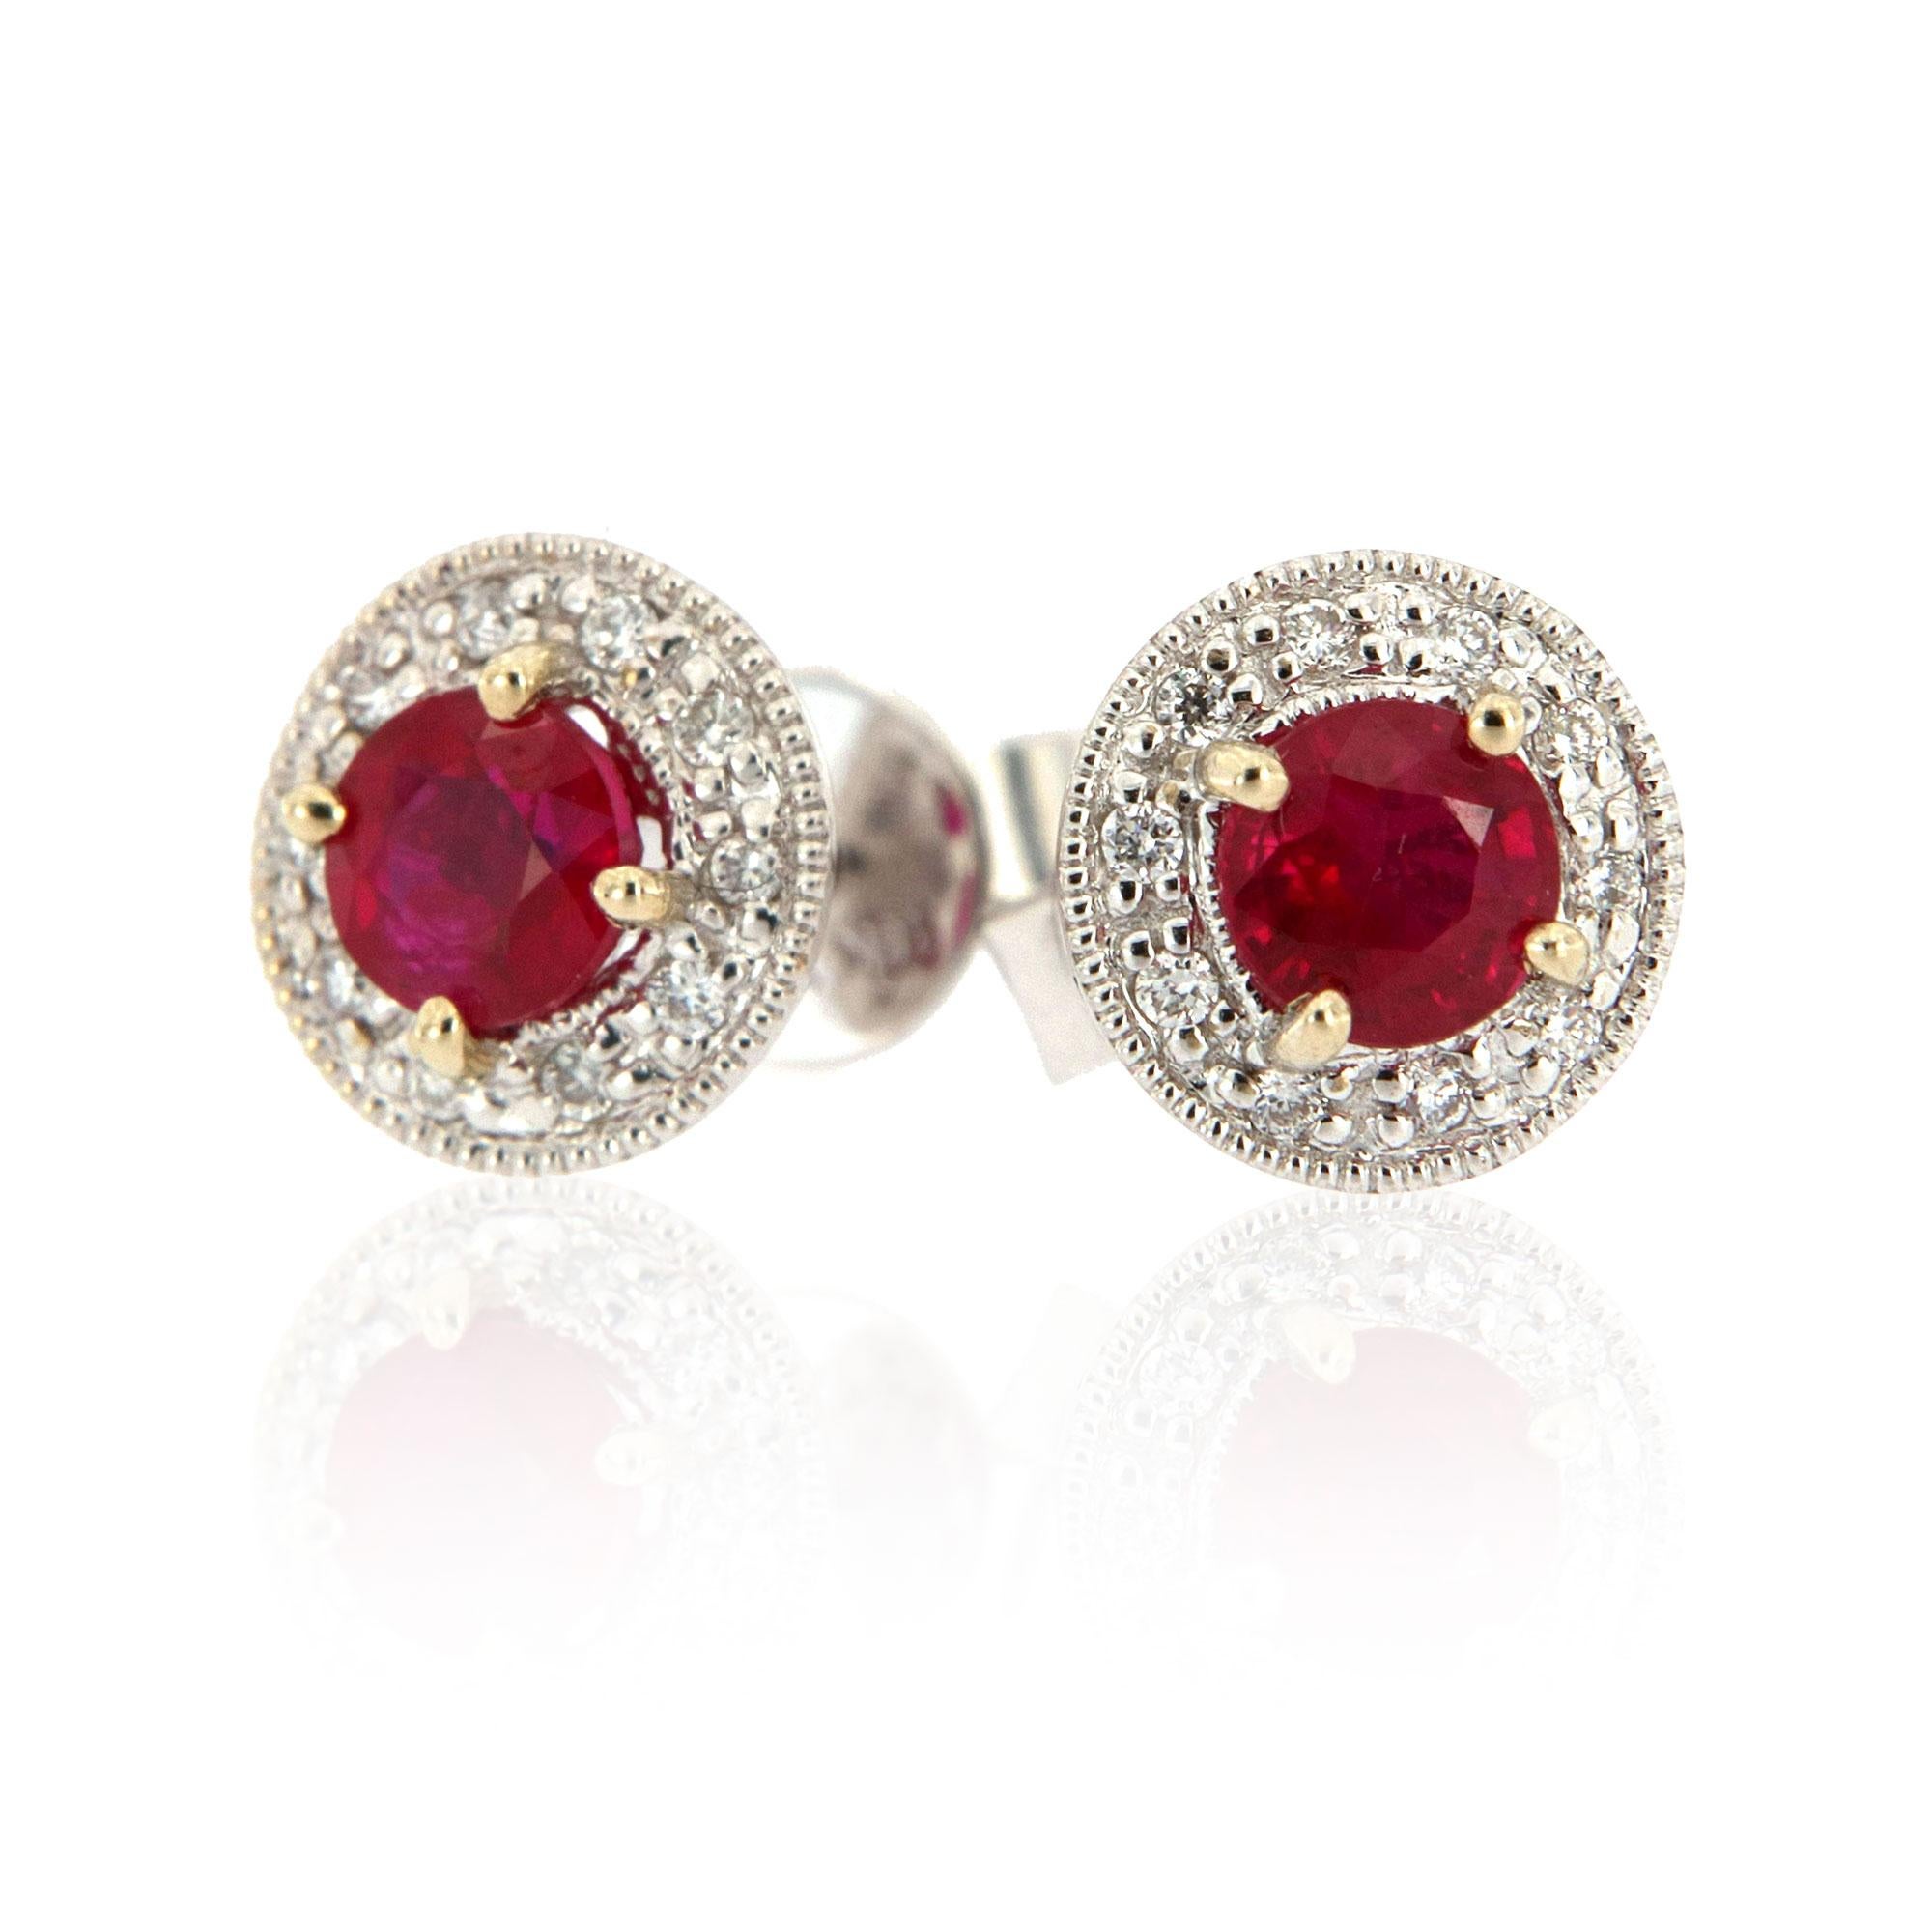 Round Cut 18 Karat White Gold Halo Diamonds and Ruby Earrings '3/4 Carat' For Sale